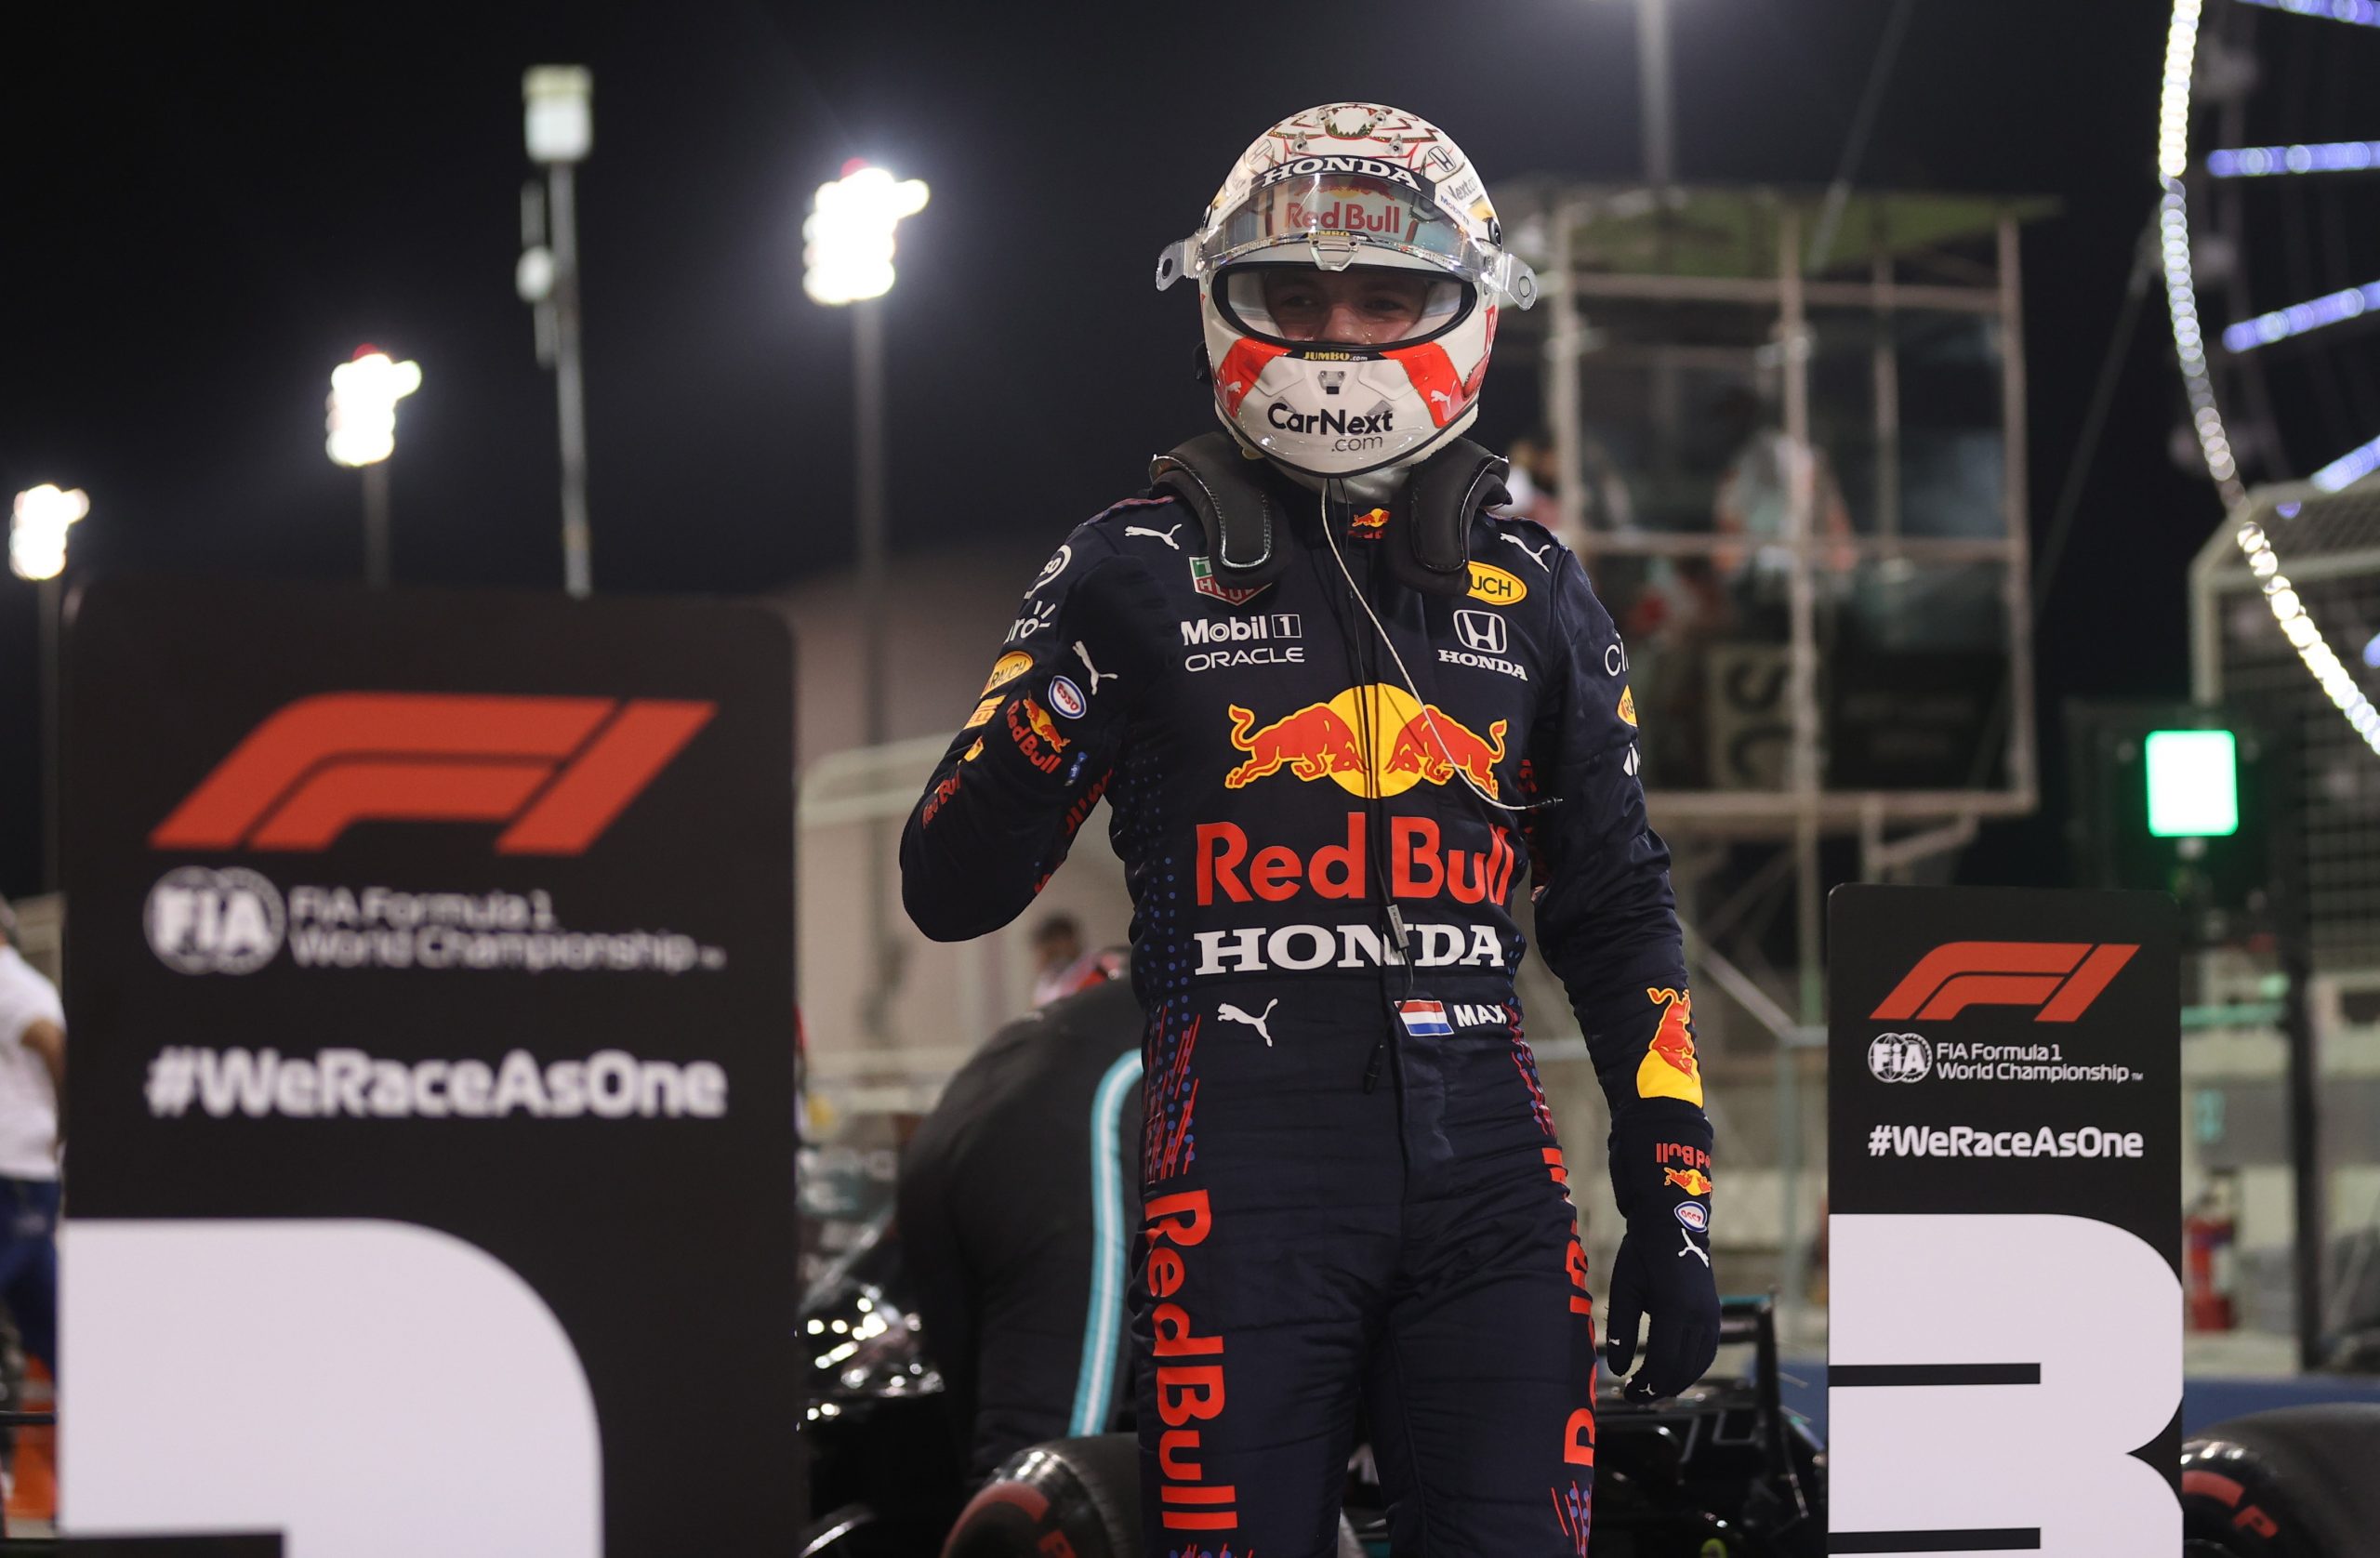 epa09101384 Dutch Formula One driver Max Verstappen of Red Bull Racing  reacts after he took pole position during the qualifying session of the 2021 Formula One Grand Prix of Bahrain at the Sakhir circuit near Manama, Bahrain, 27 March 2021. The 2021 Bahrain Formula One race will take place on 28 March 2021.  EPA/Lars Baron / POOL